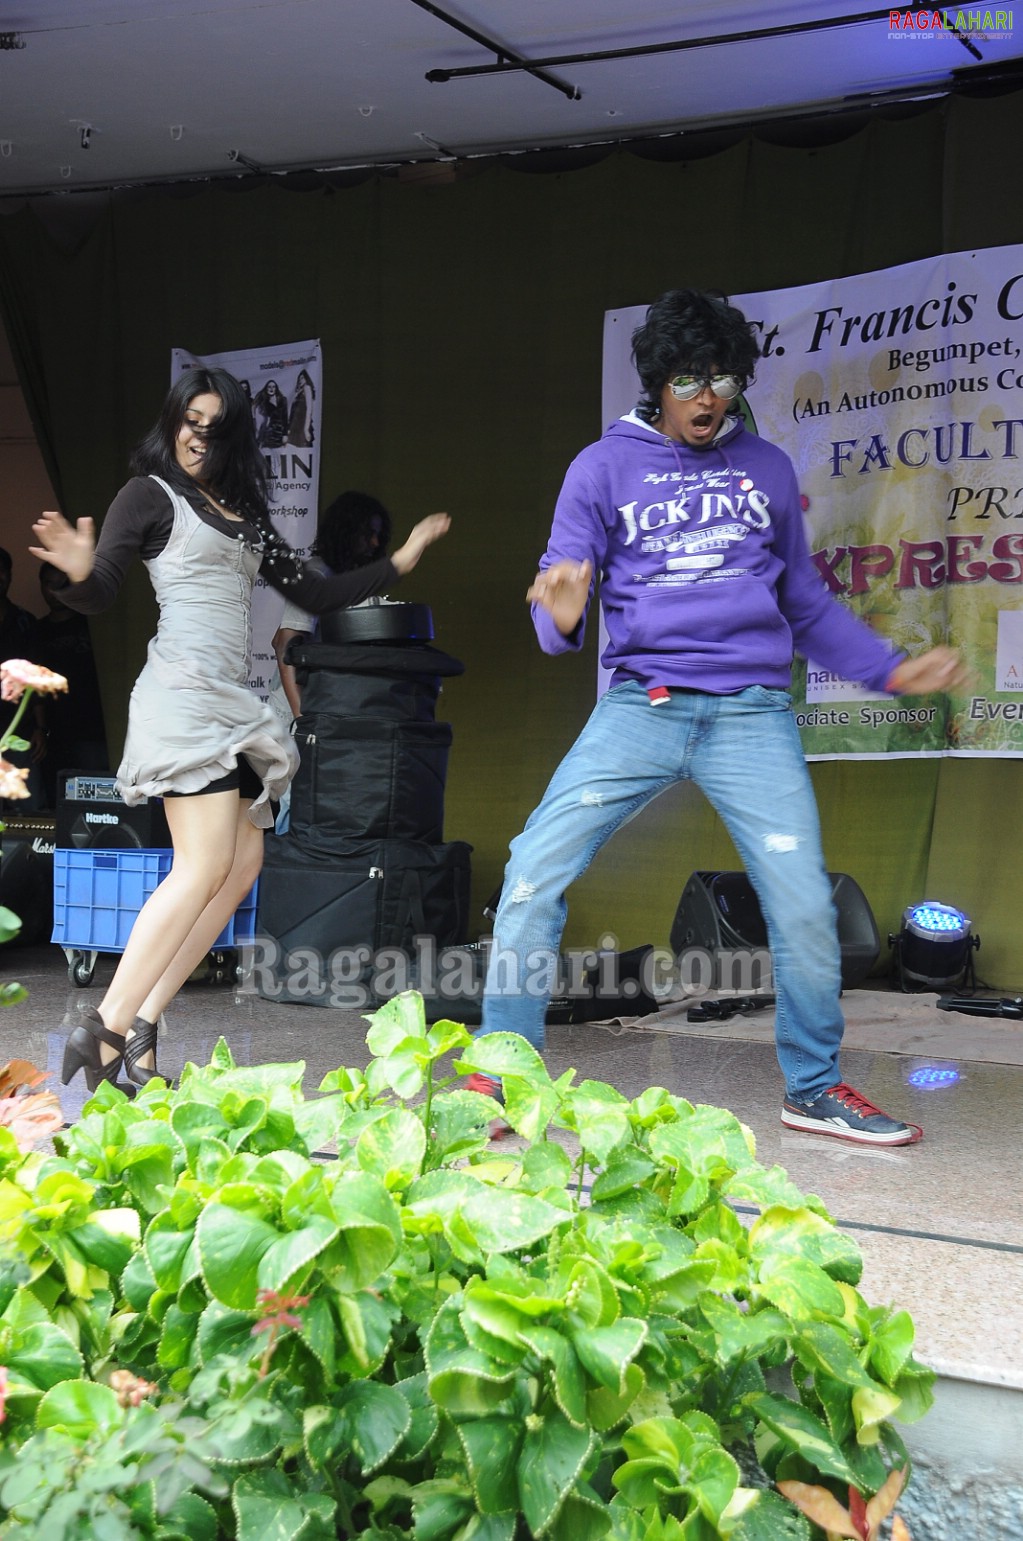 Mr. & Ms. Xpressions 2010 @ St. Francis Degree College For Women, Hyd